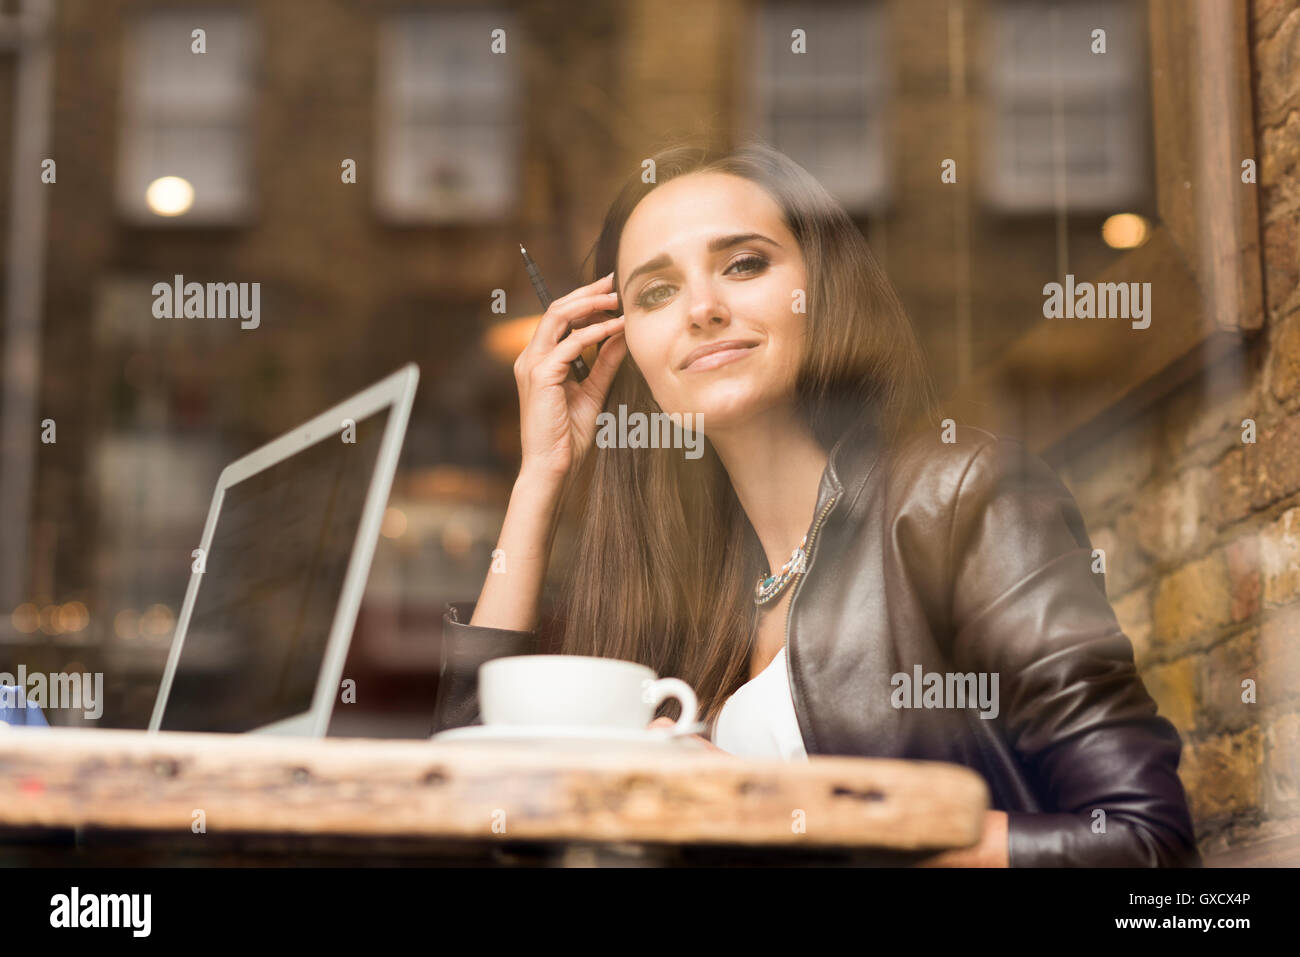 Affichage fenêtre portrait of young businesswoman with laptop in cafe Banque D'Images